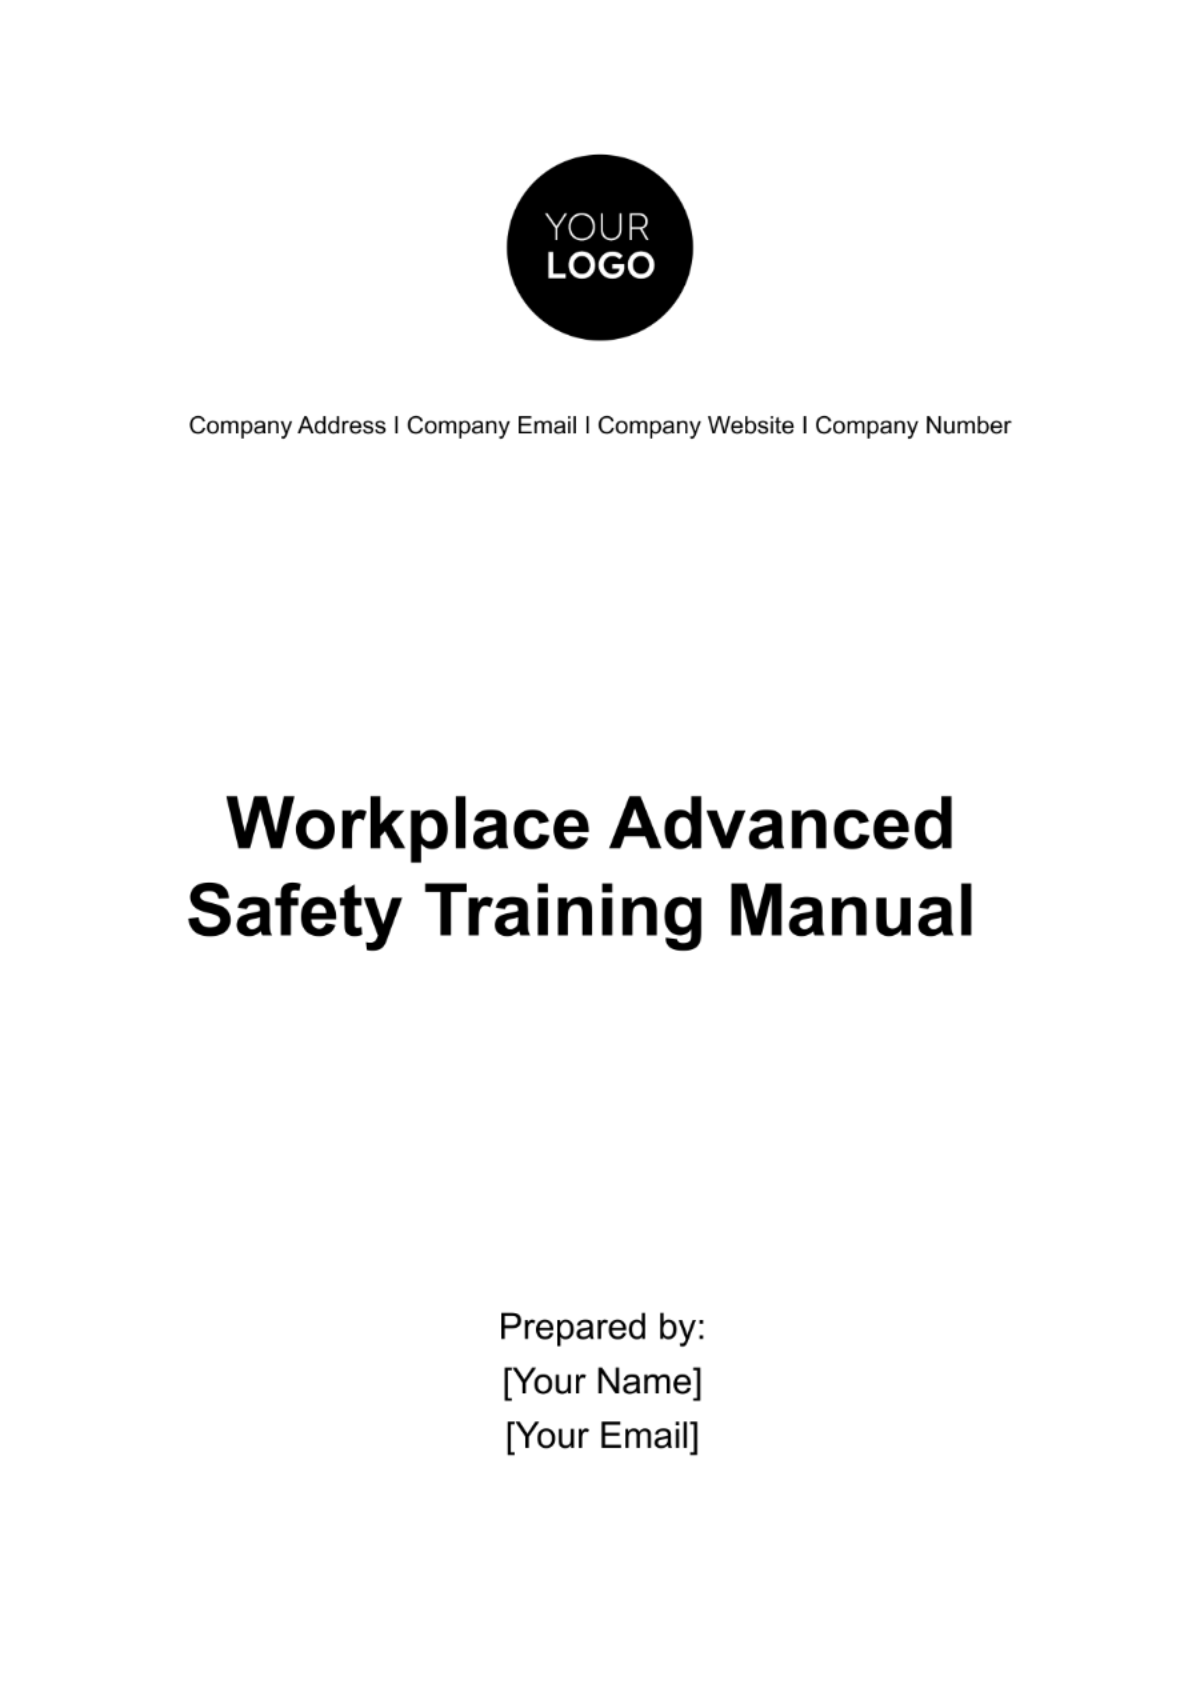 Workplace Advanced Safety Training Manual Template